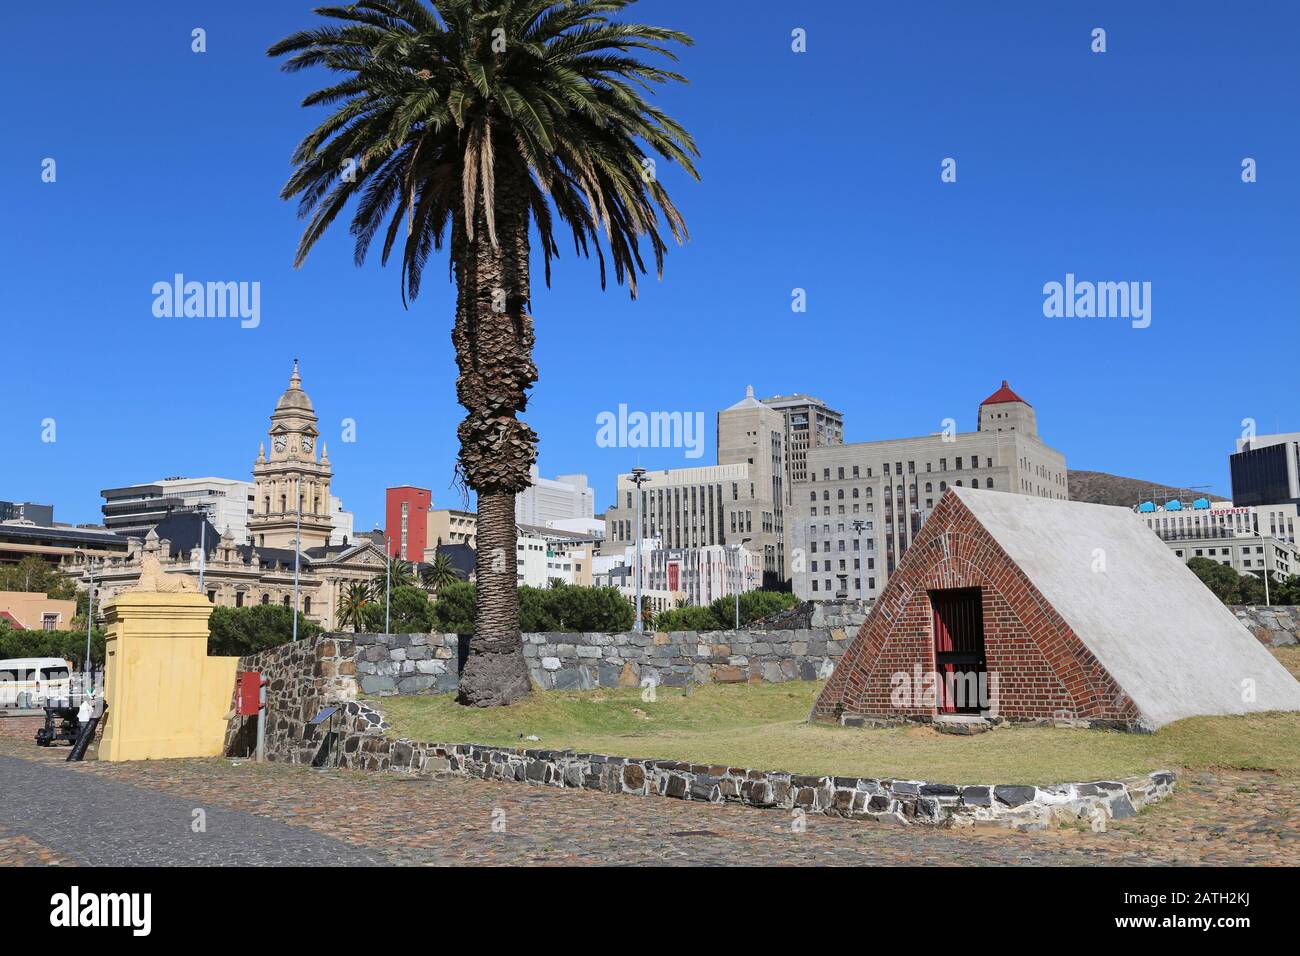 Outer Bastion and Arsenal, Castle of Good Hope, City Hall beyond, Cape Town, Table Bay, Western Cape Province, South Africa, Africa Stock Photo